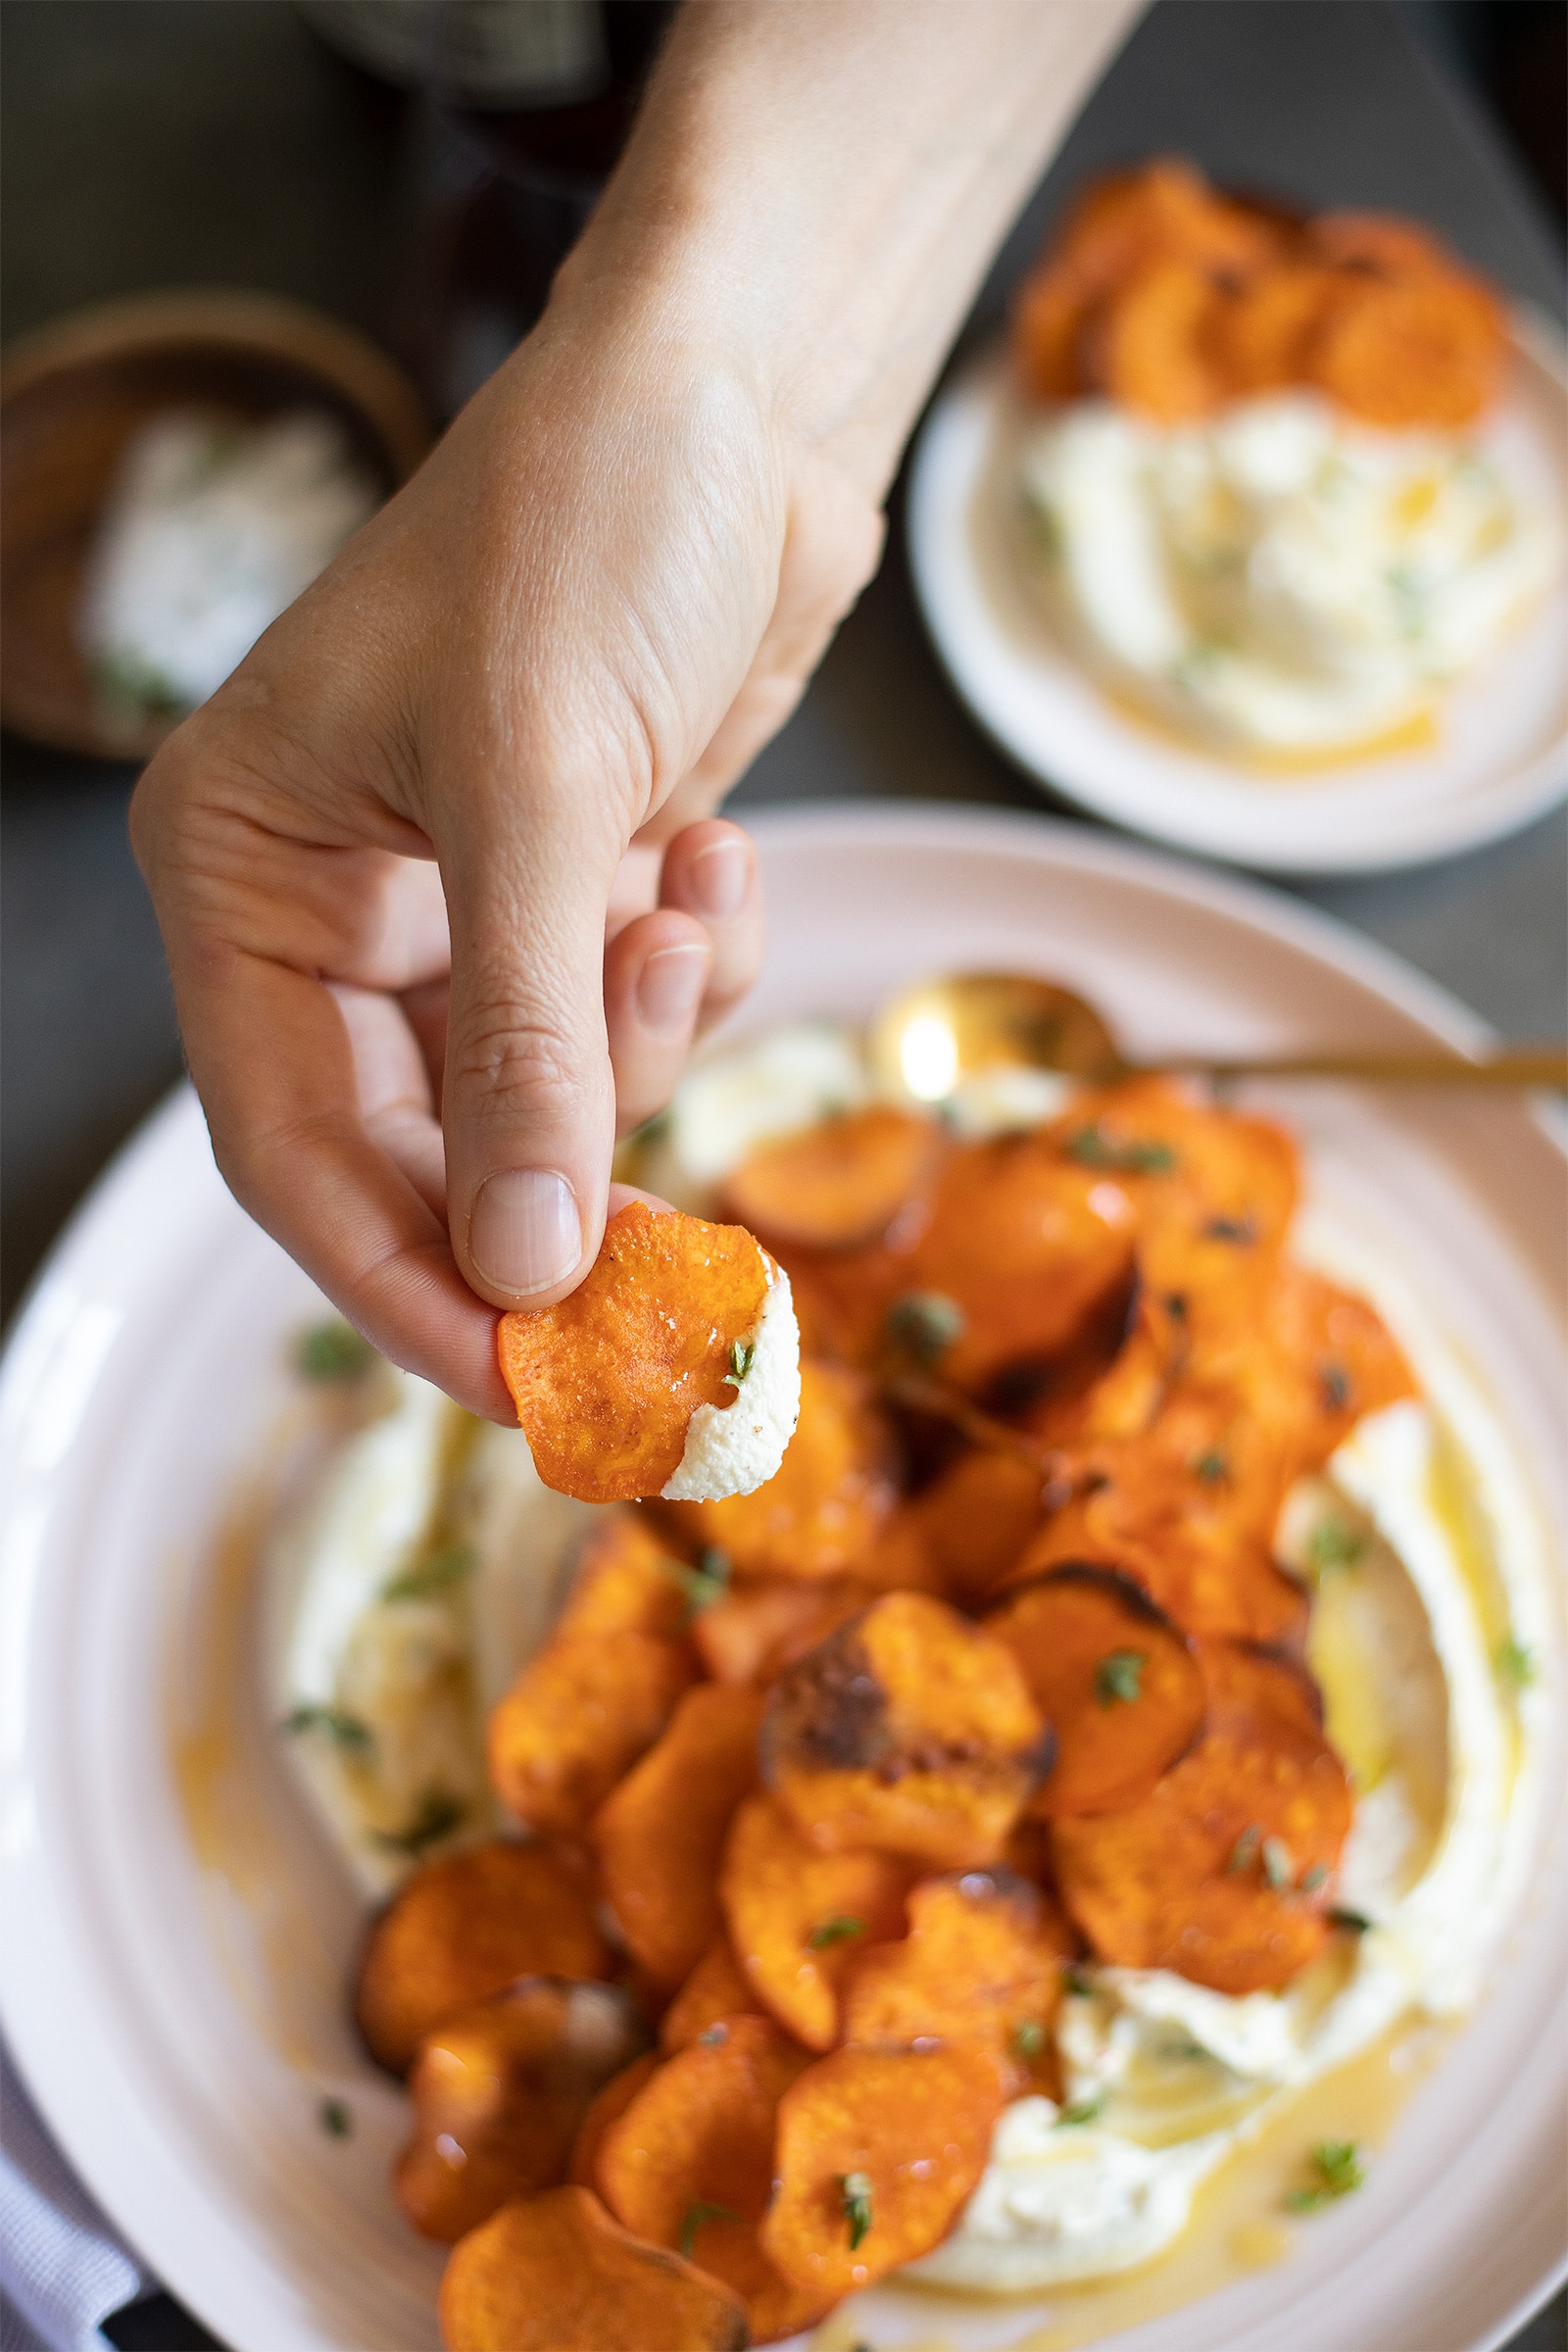 Sweet Potato Chips With Whipped Goat Cheese Recipe